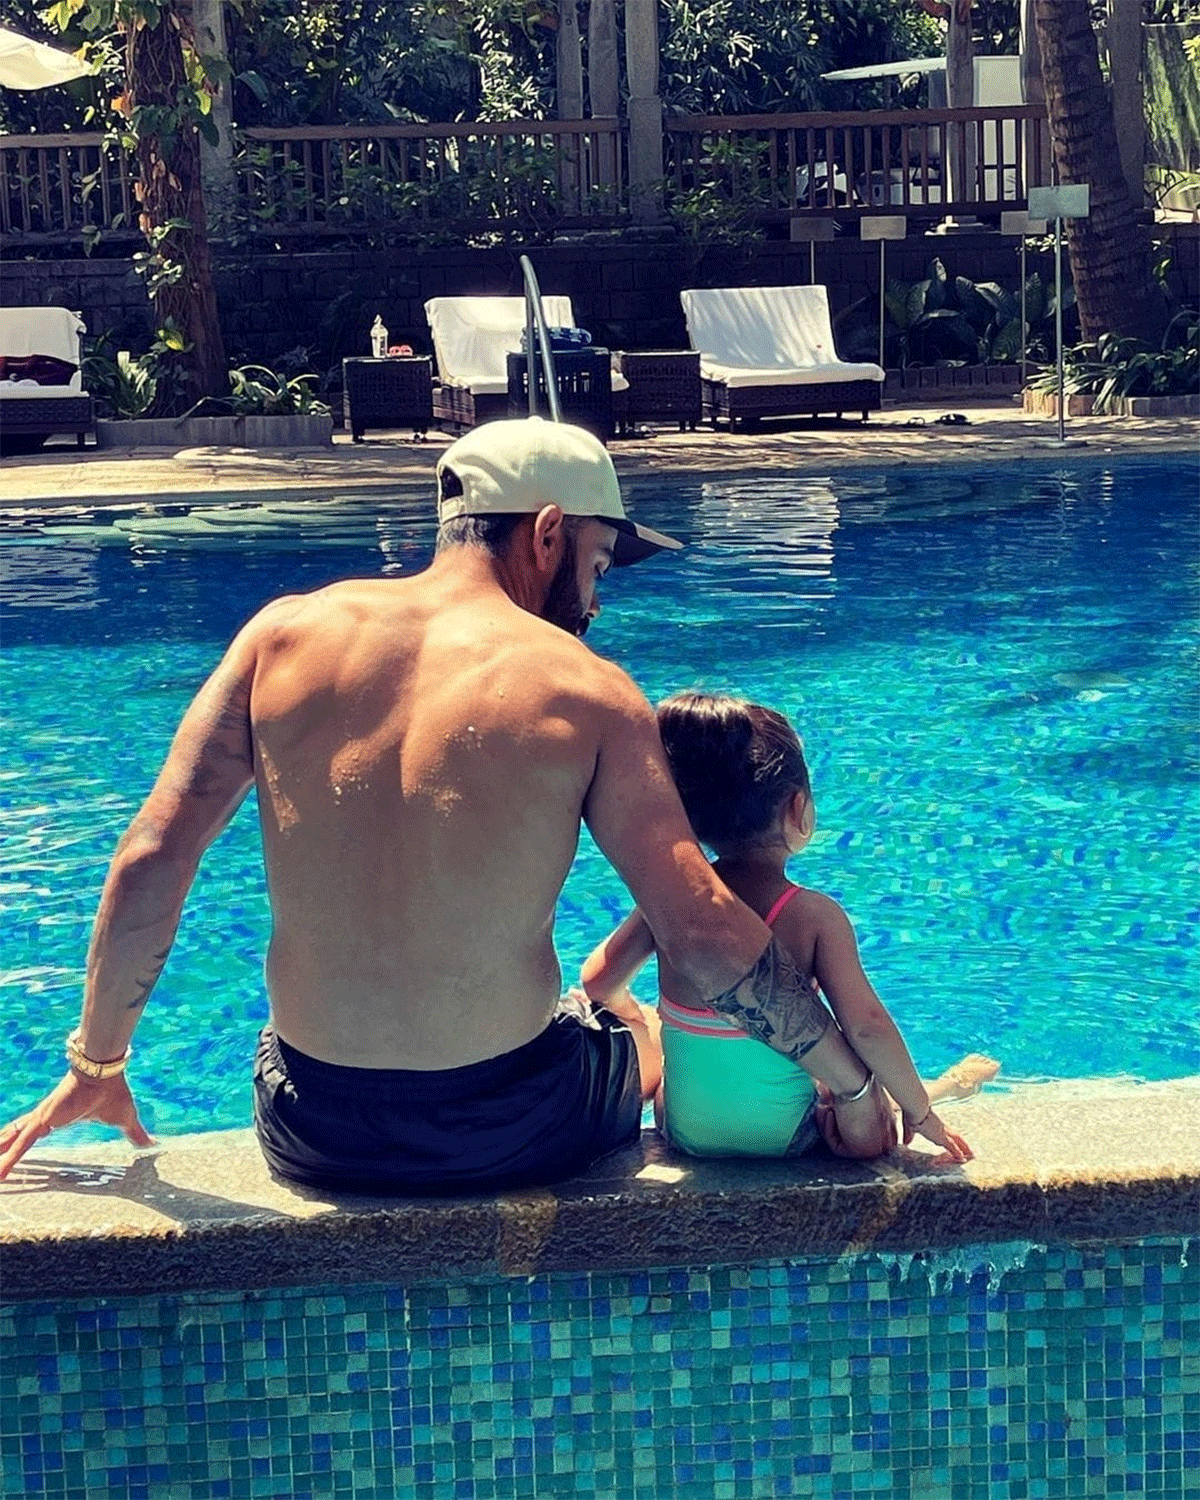 Virat Kohli puts a caring arm around his daughter Vamika as they sit by the pool